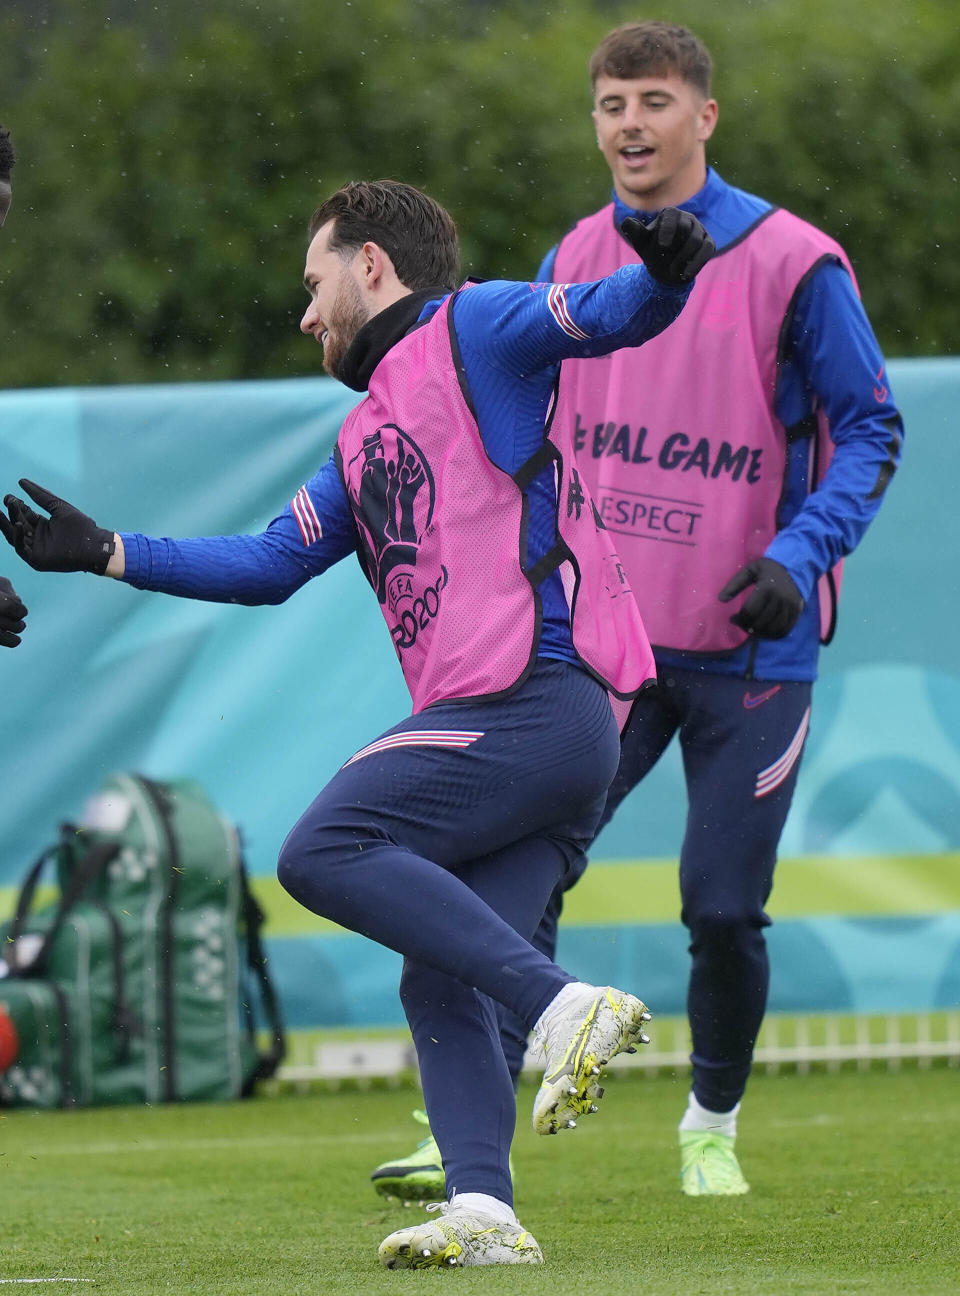 England's Mason Mount, right, and England's Ben Chilwell, left, during a team training session at Tottenham Hotspur training ground in London, Monday, June 21, 2021 one day ahead of the Euro 2020 soccer championship group D match against Czech Republic. After a positive test for Scotland midfielder Billy Gilmour, Mason Mount and Ben Chilwell have been told to self isolate following "interaction" with Gilmour during England's 0-0 draw with Scotland at Wembley Stadium on Friday. (AP Photo/Frank Augstein)